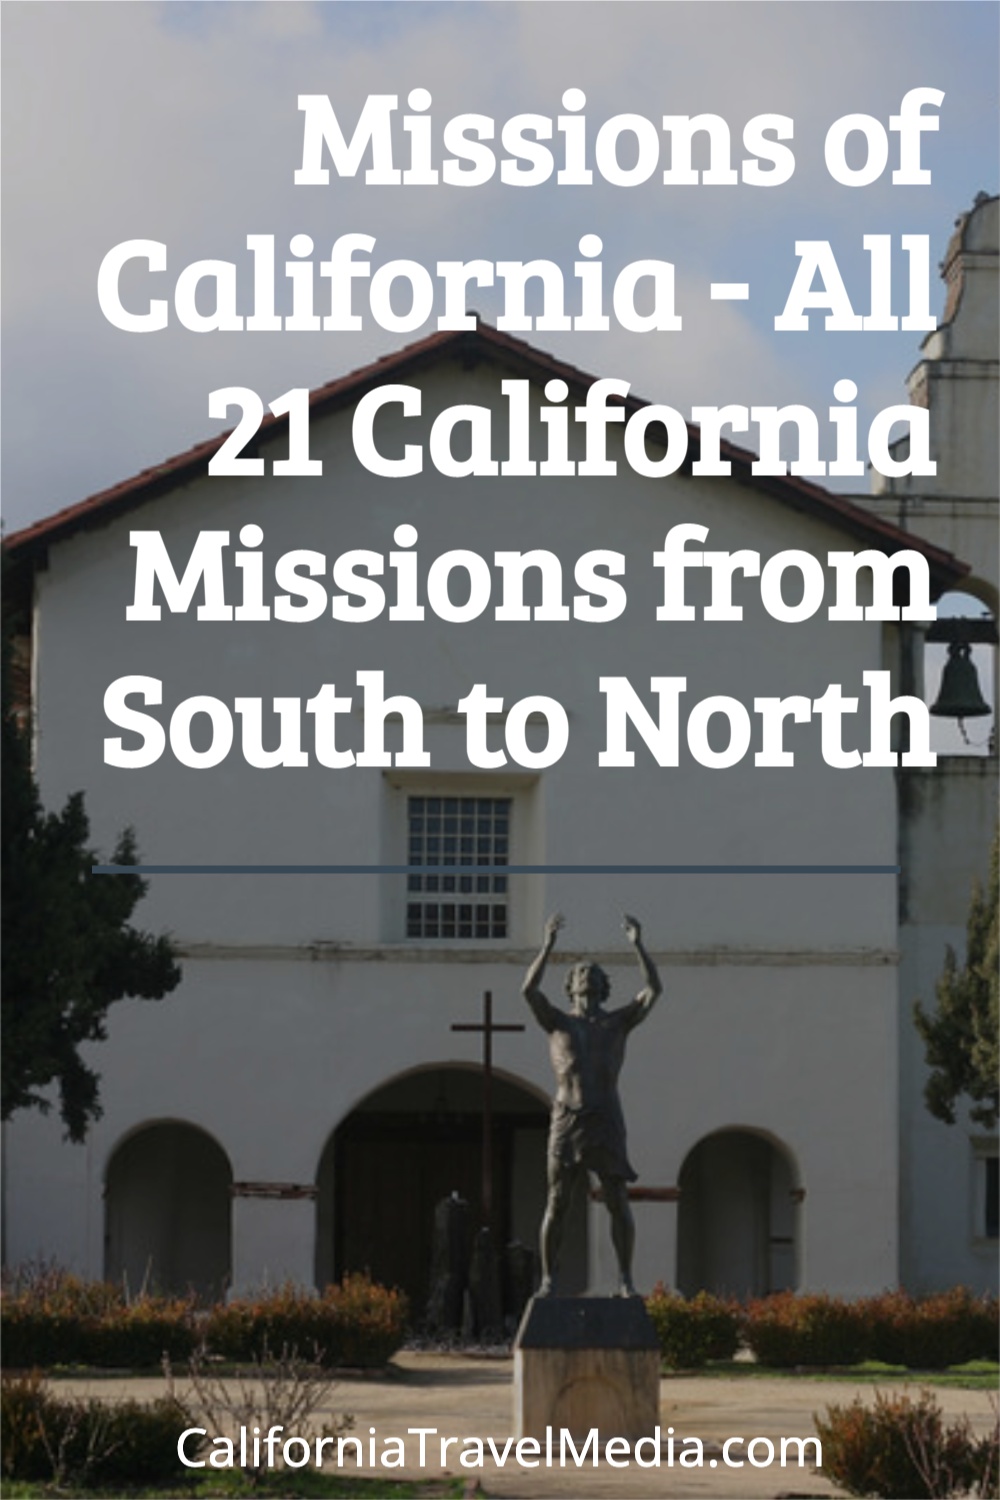 Missions of California with Map - All 21 California Missions from South to North #california #missions #history #spanish #father-serra #places #map